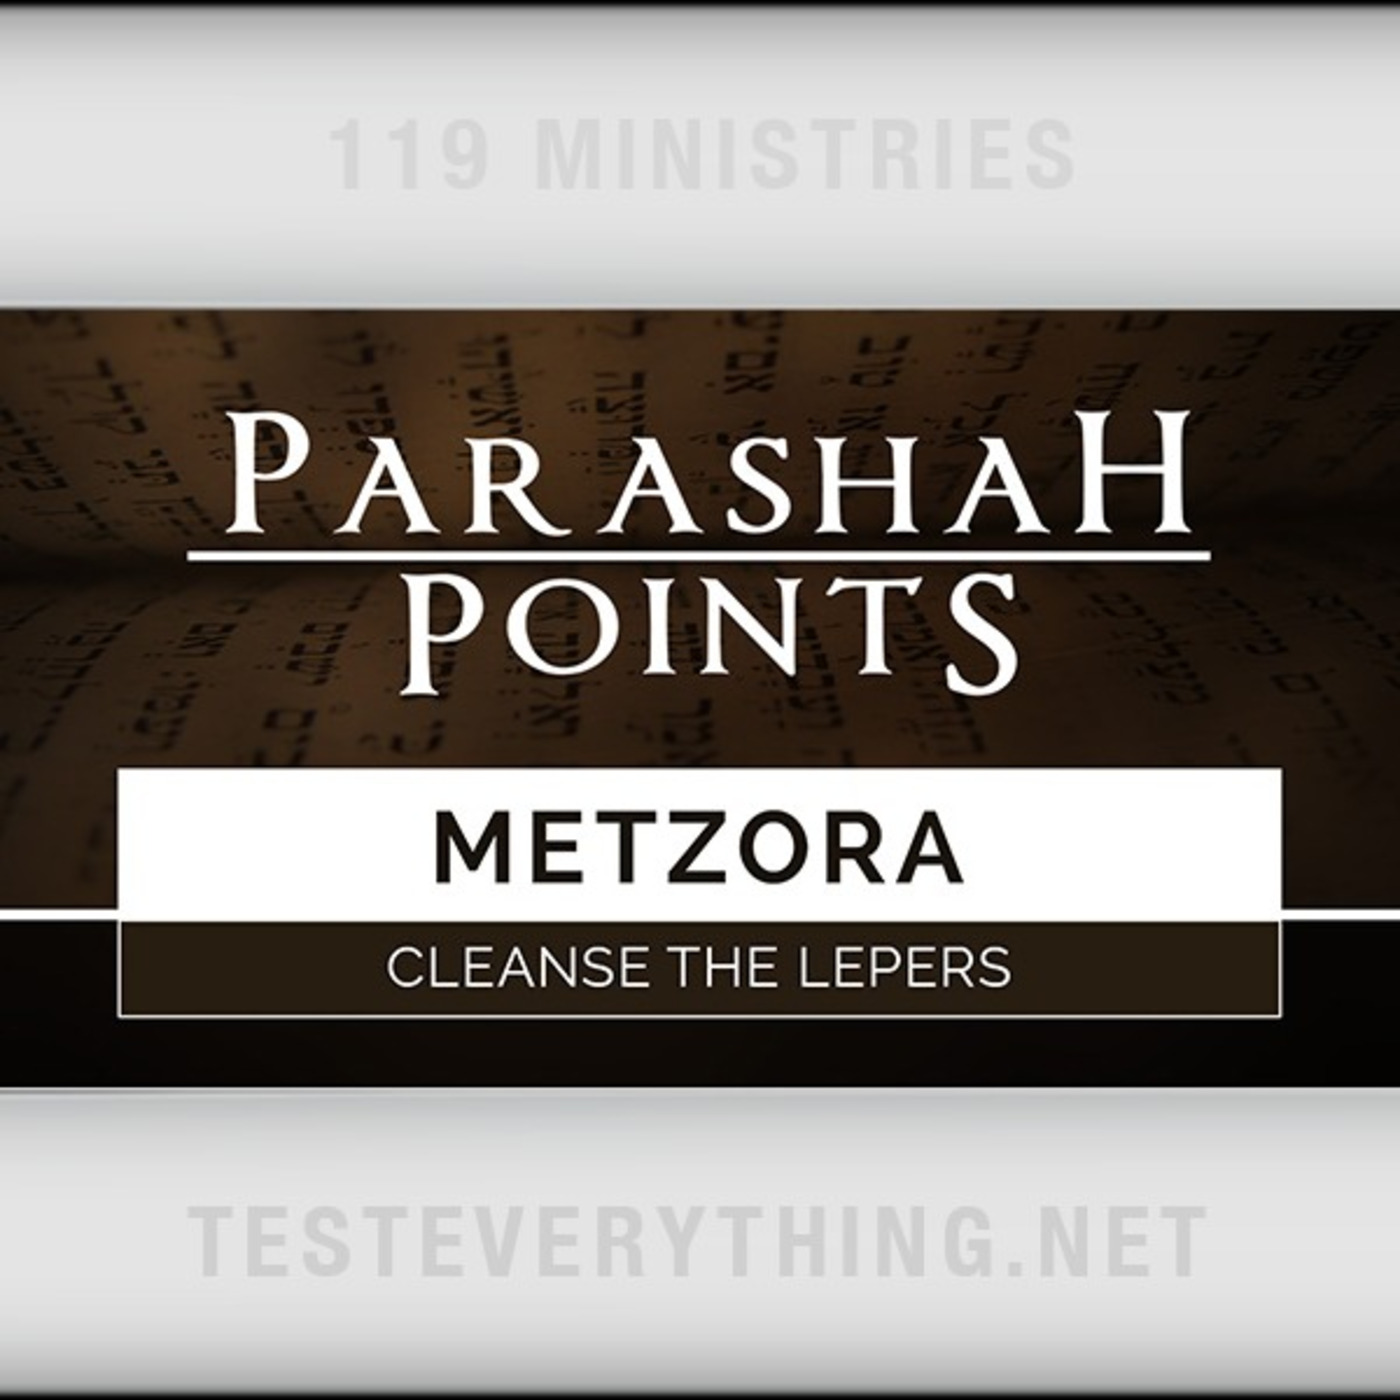 Parashah Points: Metzora - Cleanse the Lepers